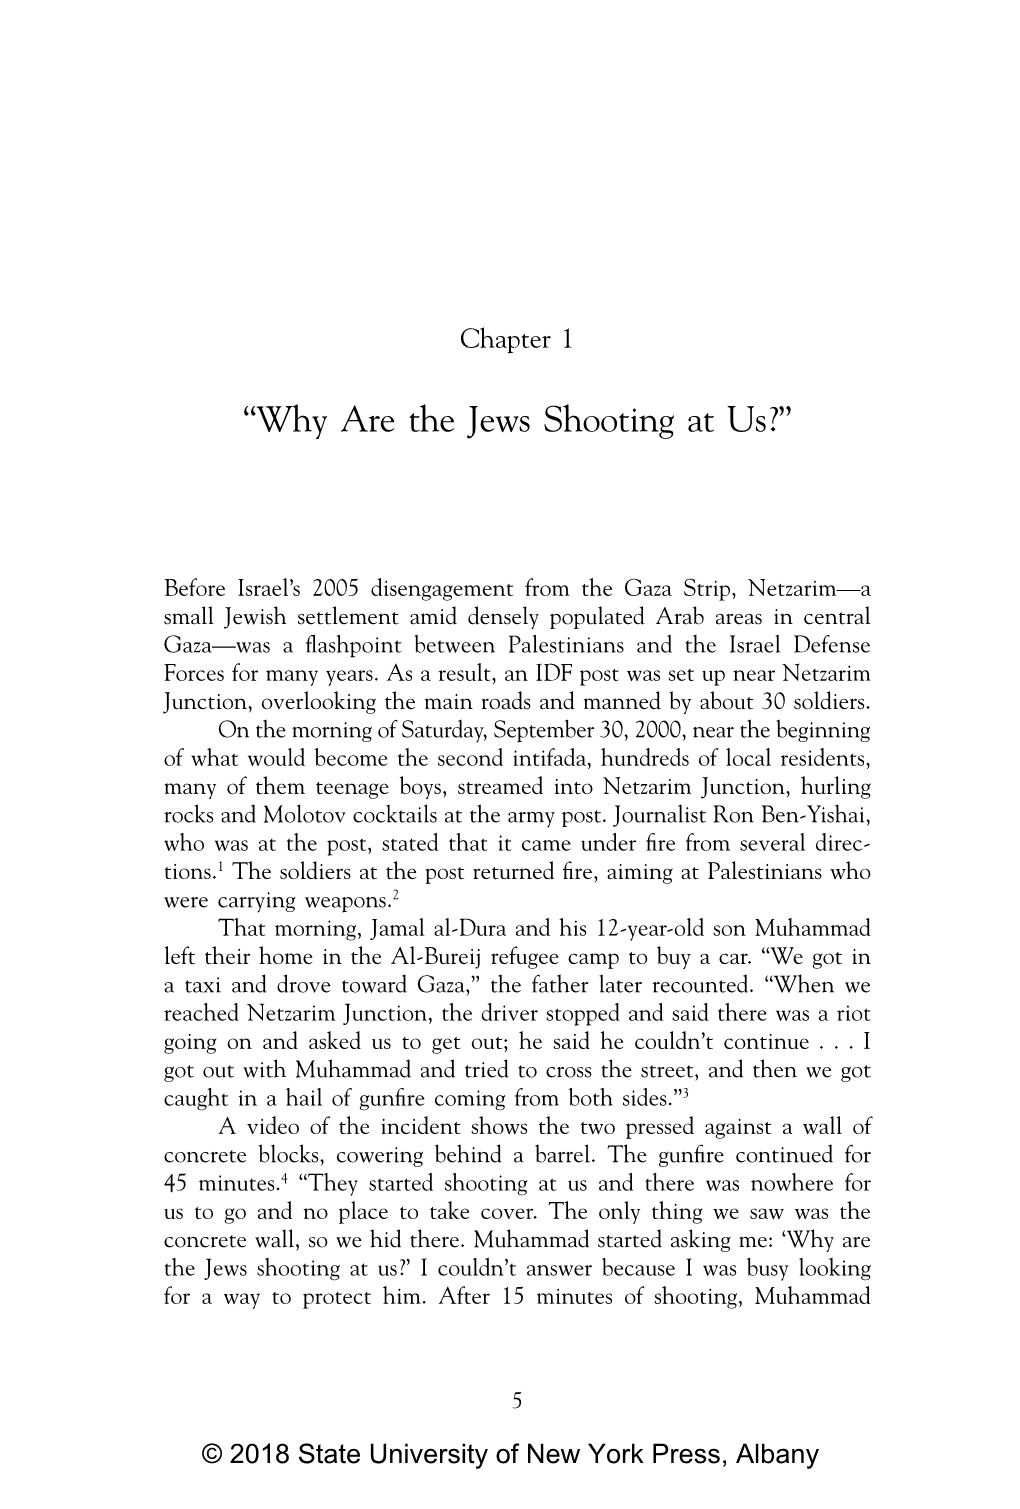 “Why Are the Jews Shooting at Us?”